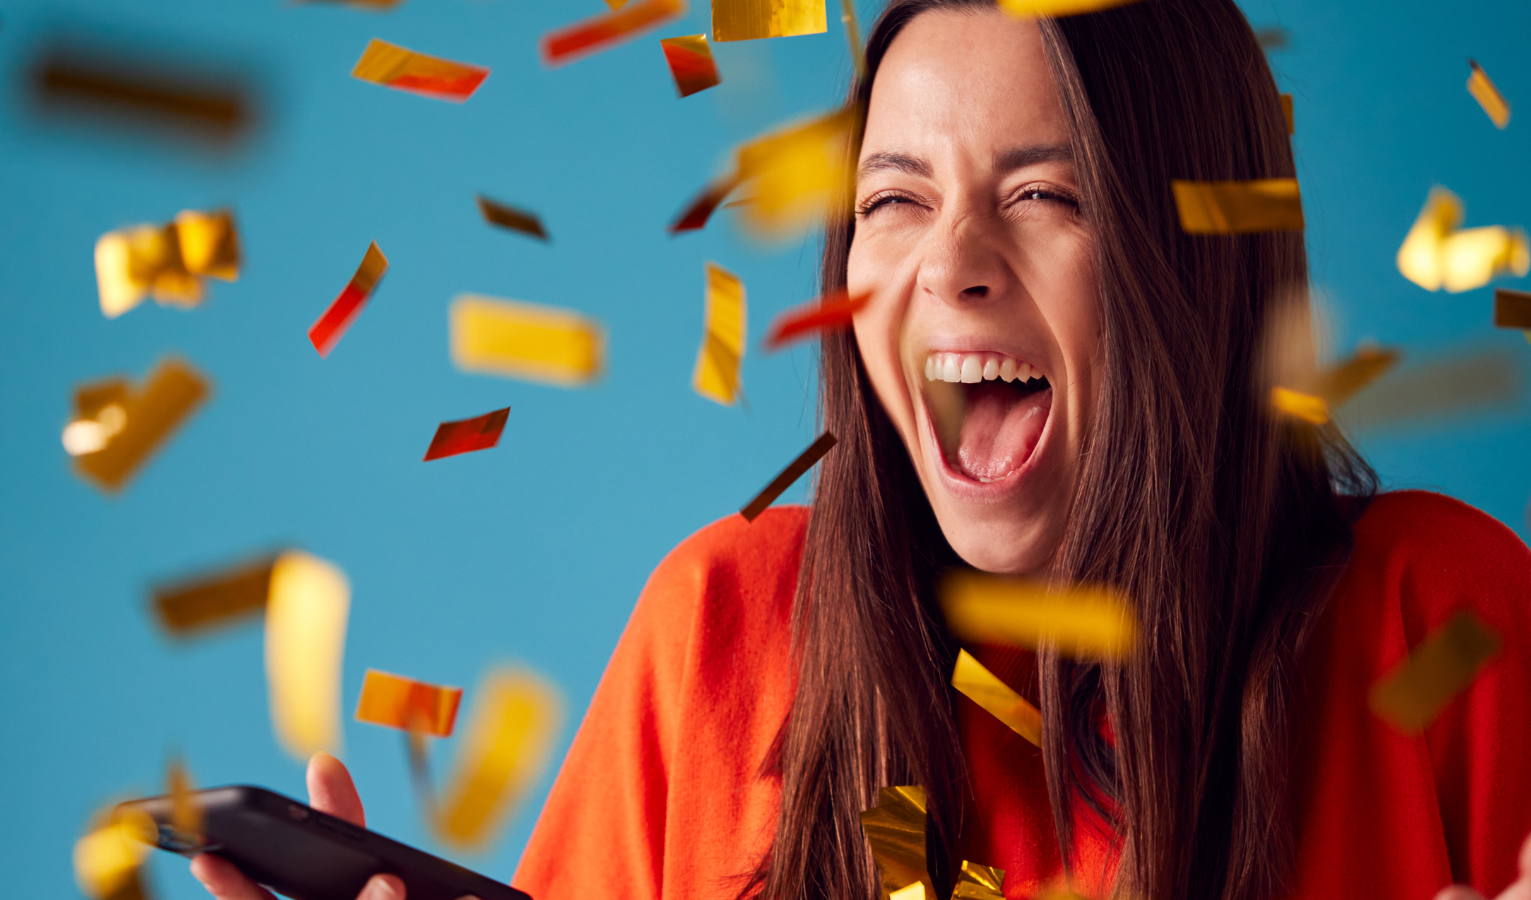 Woman celebrating in confetti after winning the lottery